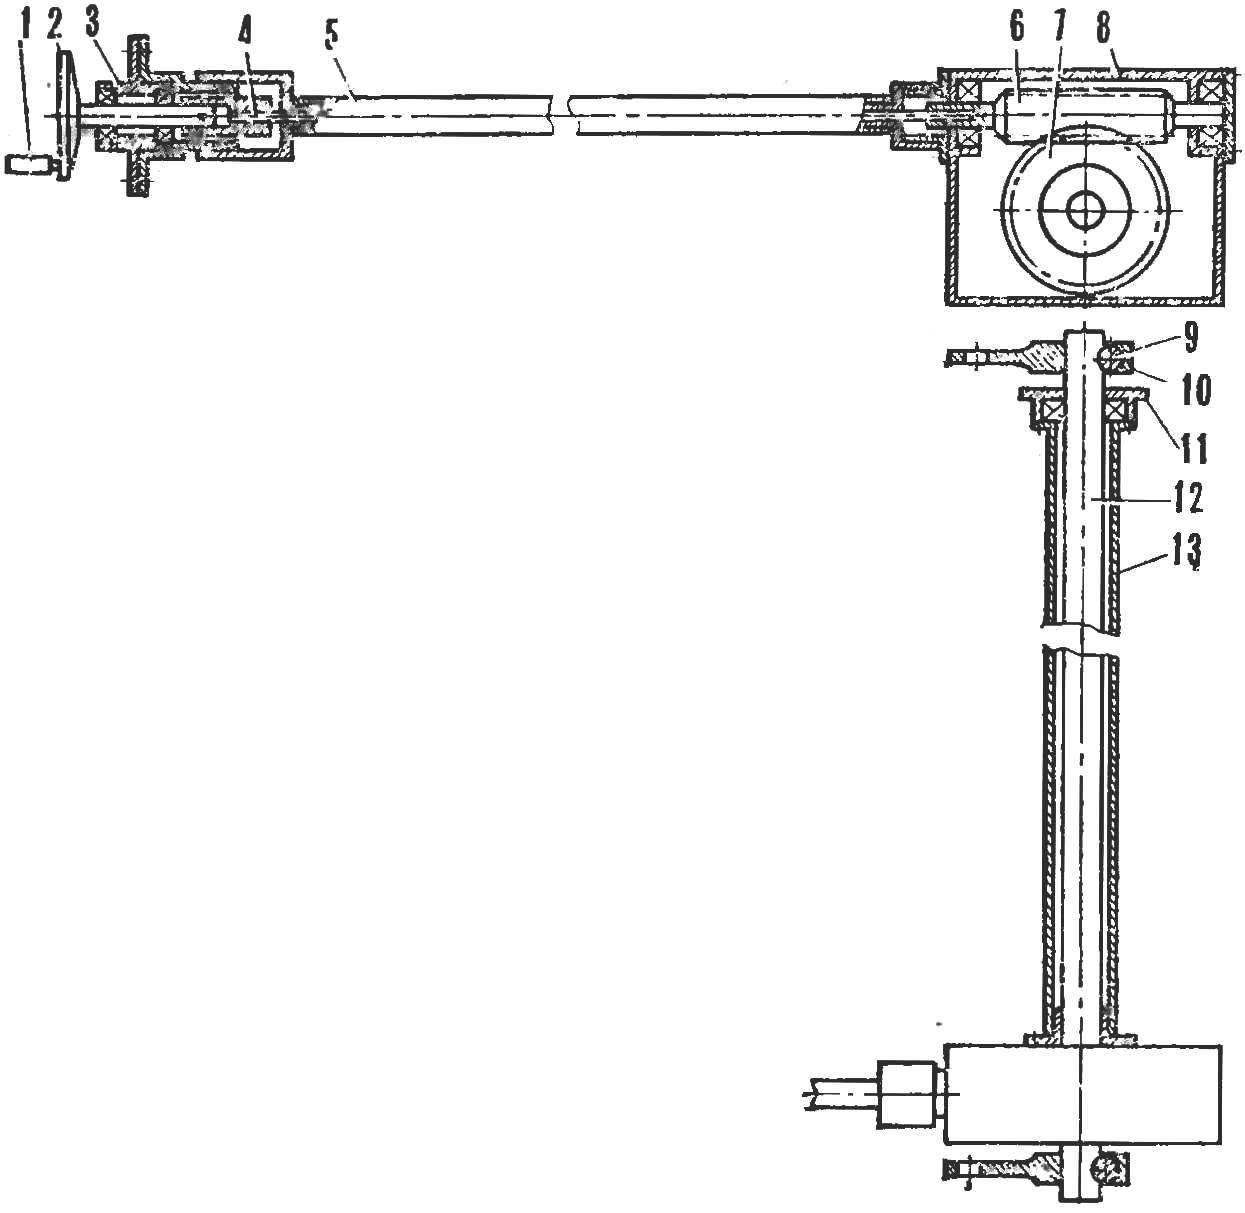 Fig. 18. The drive mechanism of the headlights